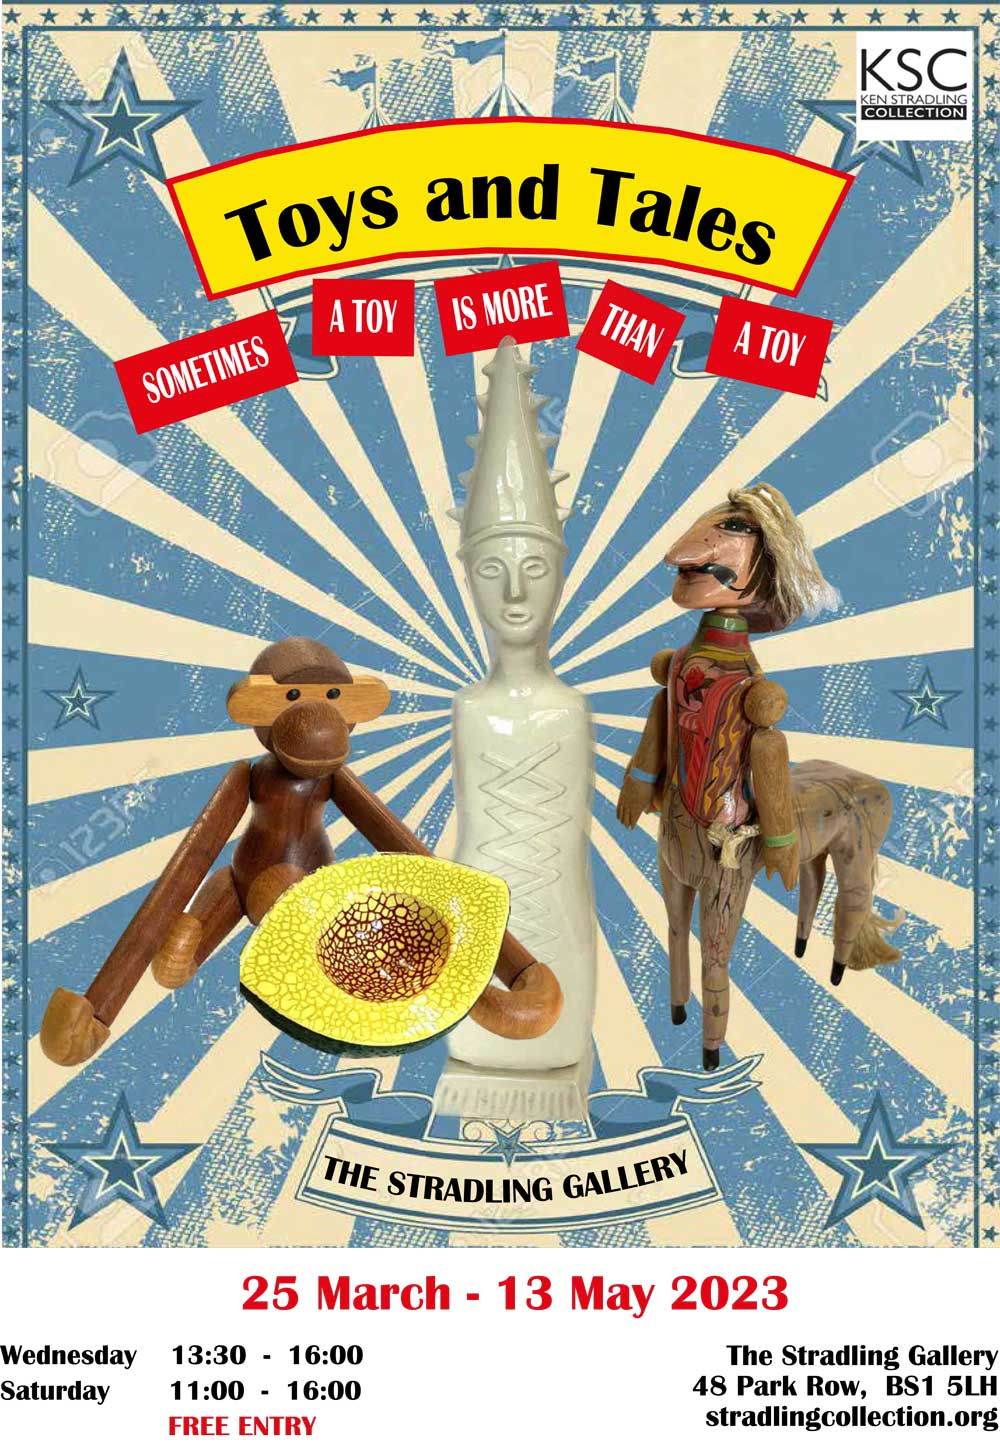 Image: poster for Toys and Tales exhibition 25 Mar-13 May 2023